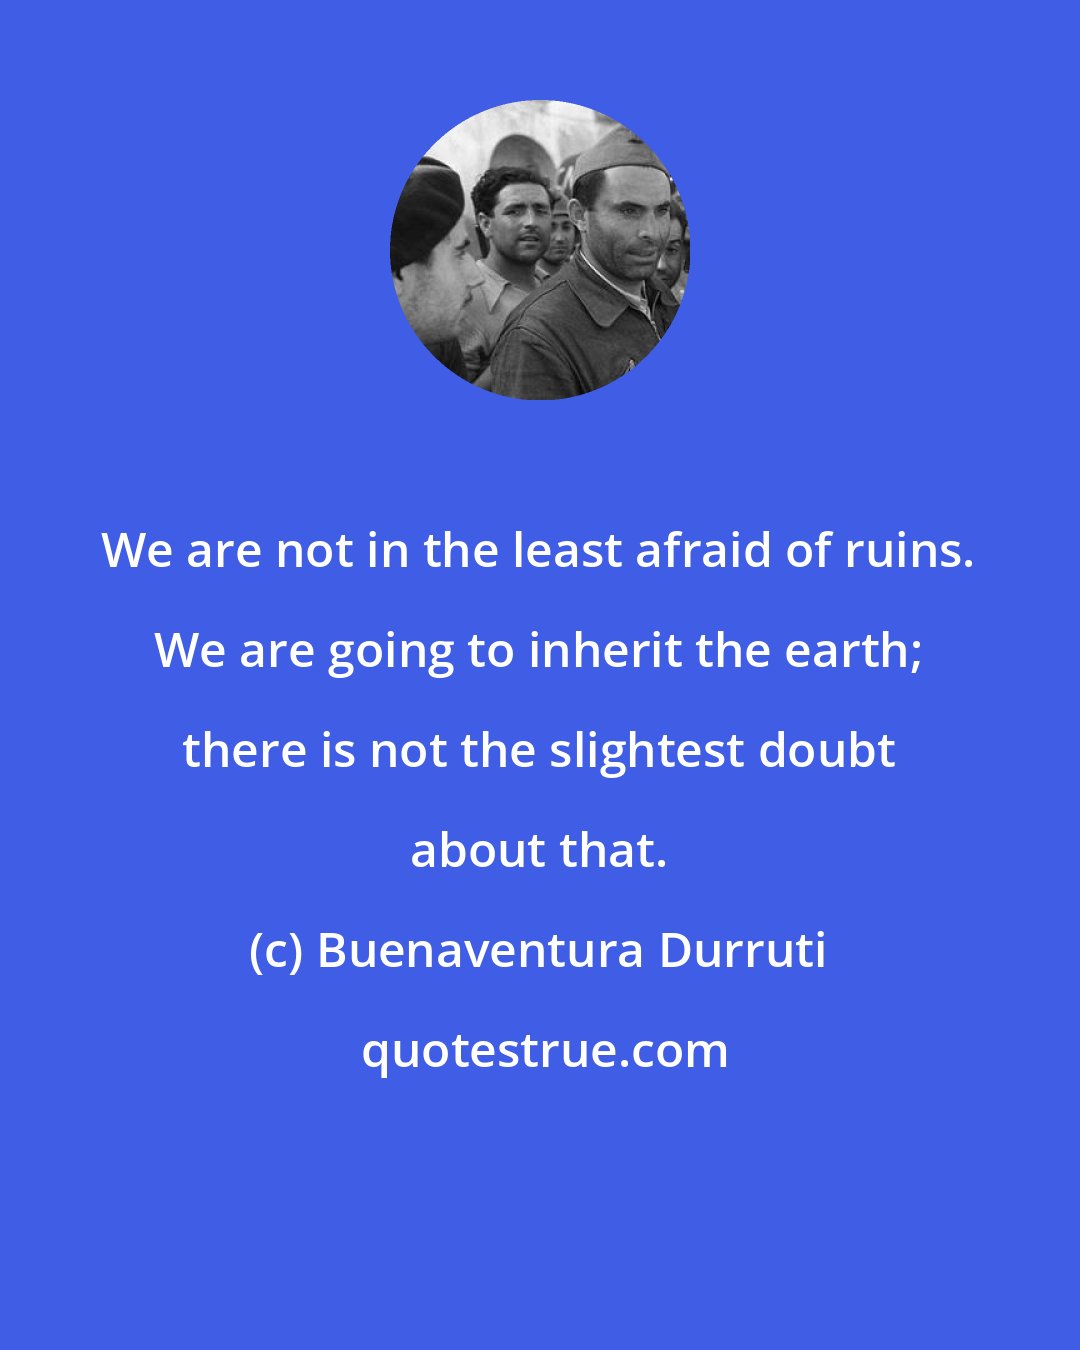 Buenaventura Durruti: We are not in the least afraid of ruins. We are going to inherit the earth; there is not the slightest doubt about that.